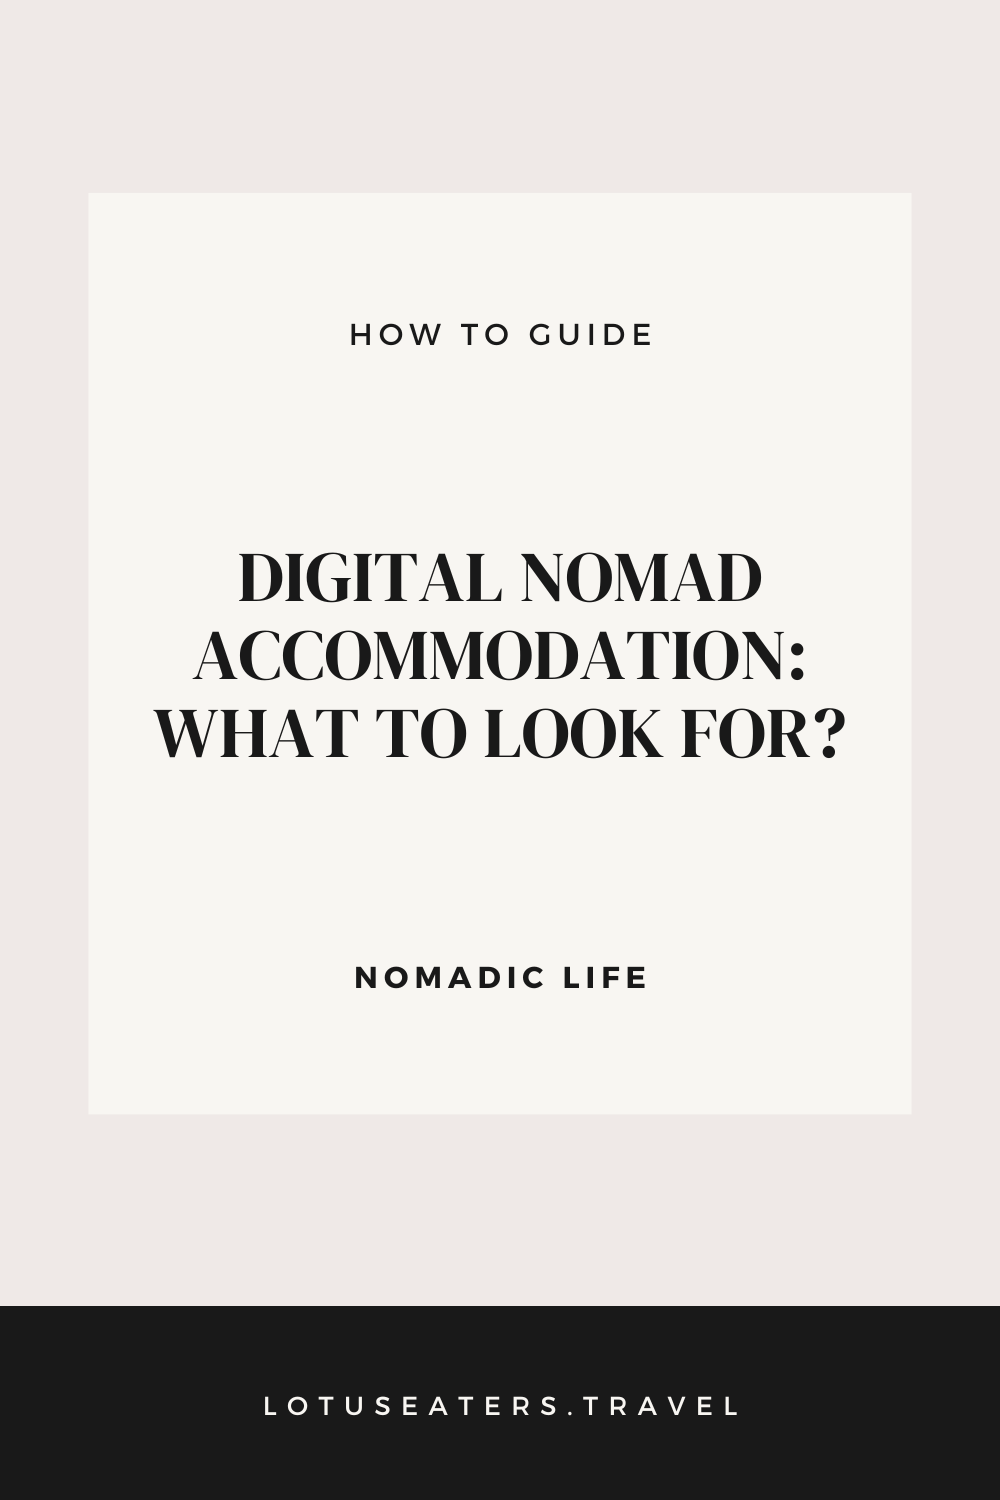 Digital Nomad Accommodation: A short guide